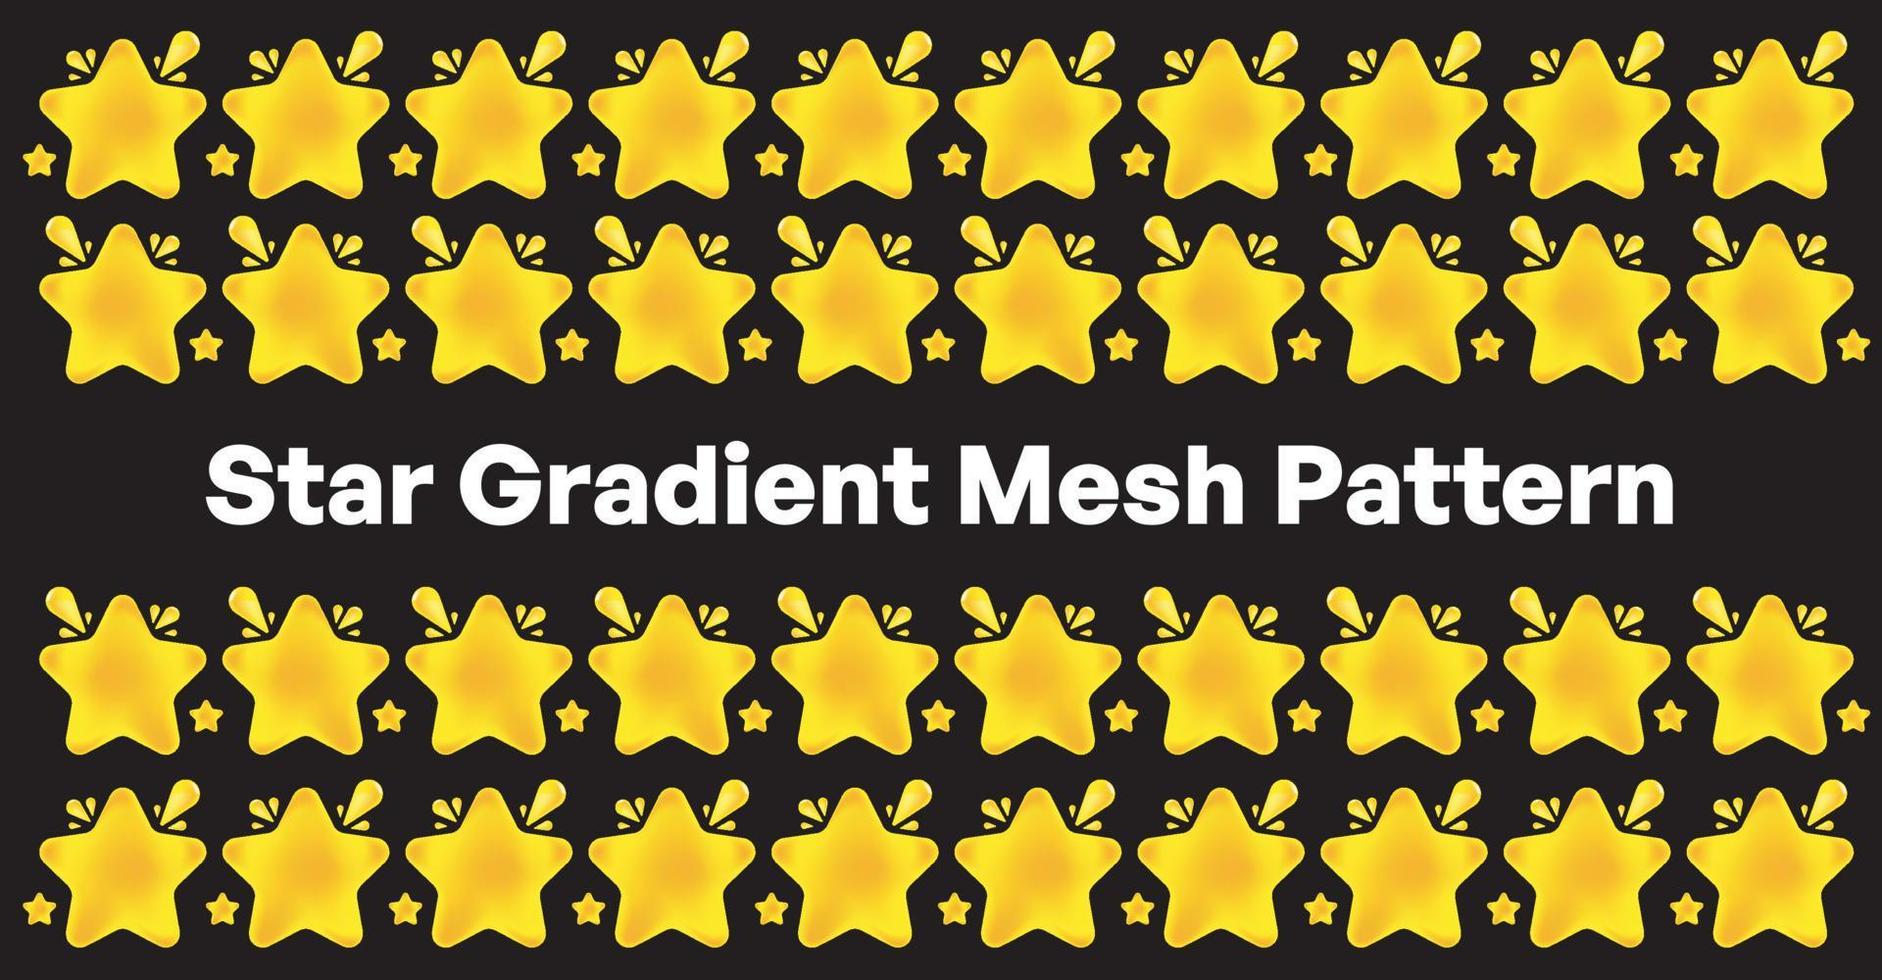 Star Mesh Gradient for Review Rating or Illustration vector